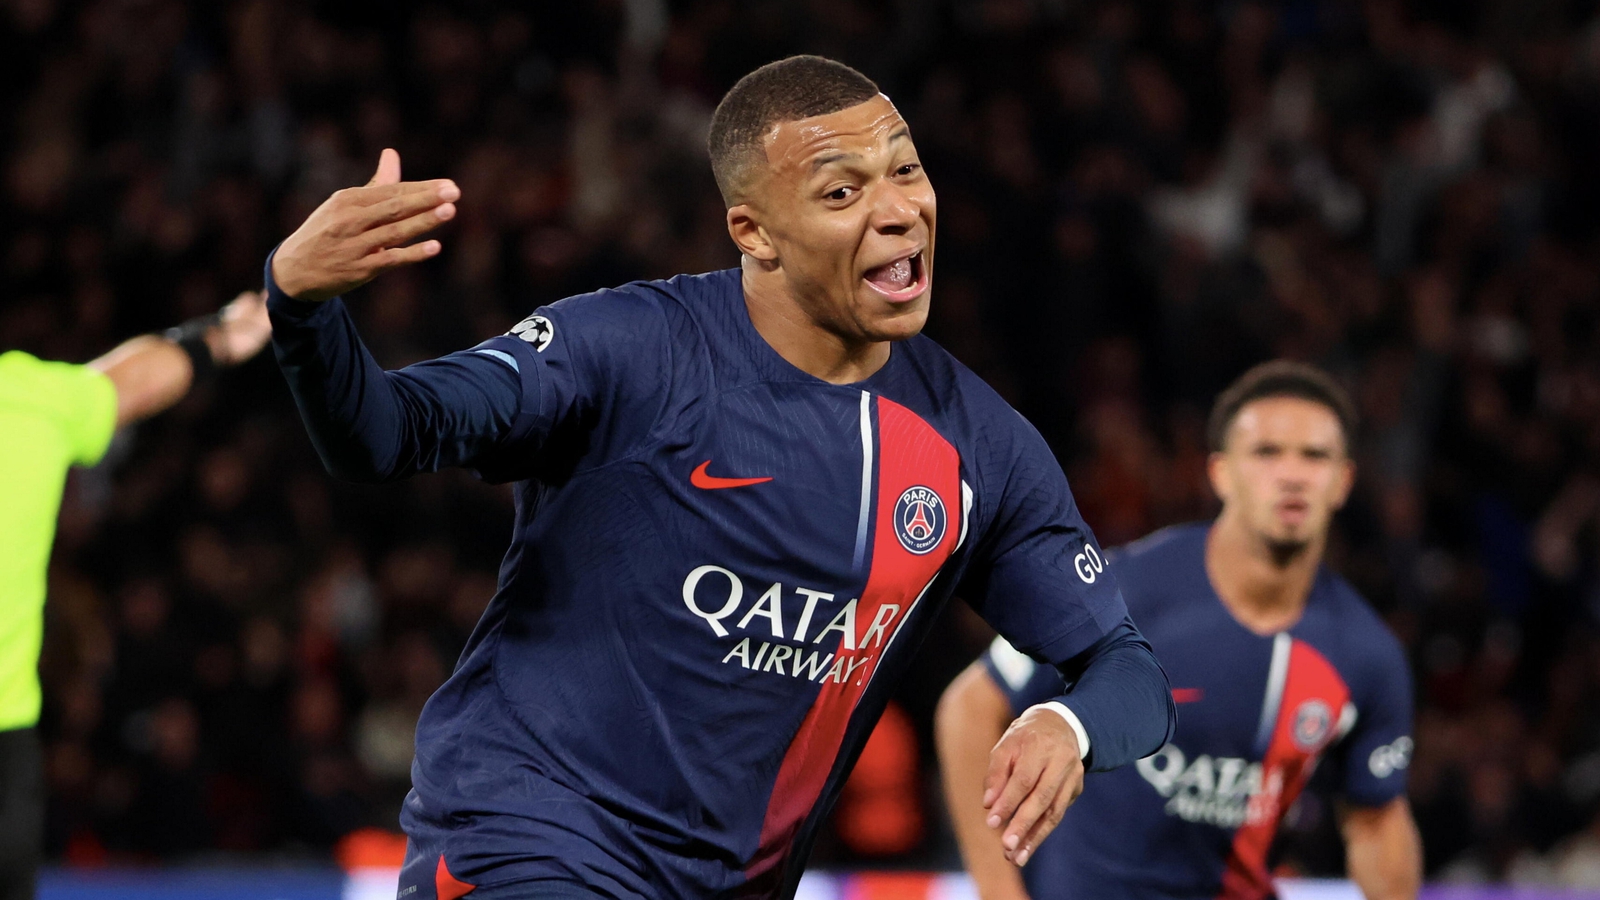 Mbappe tells PSG he will depart in the summer